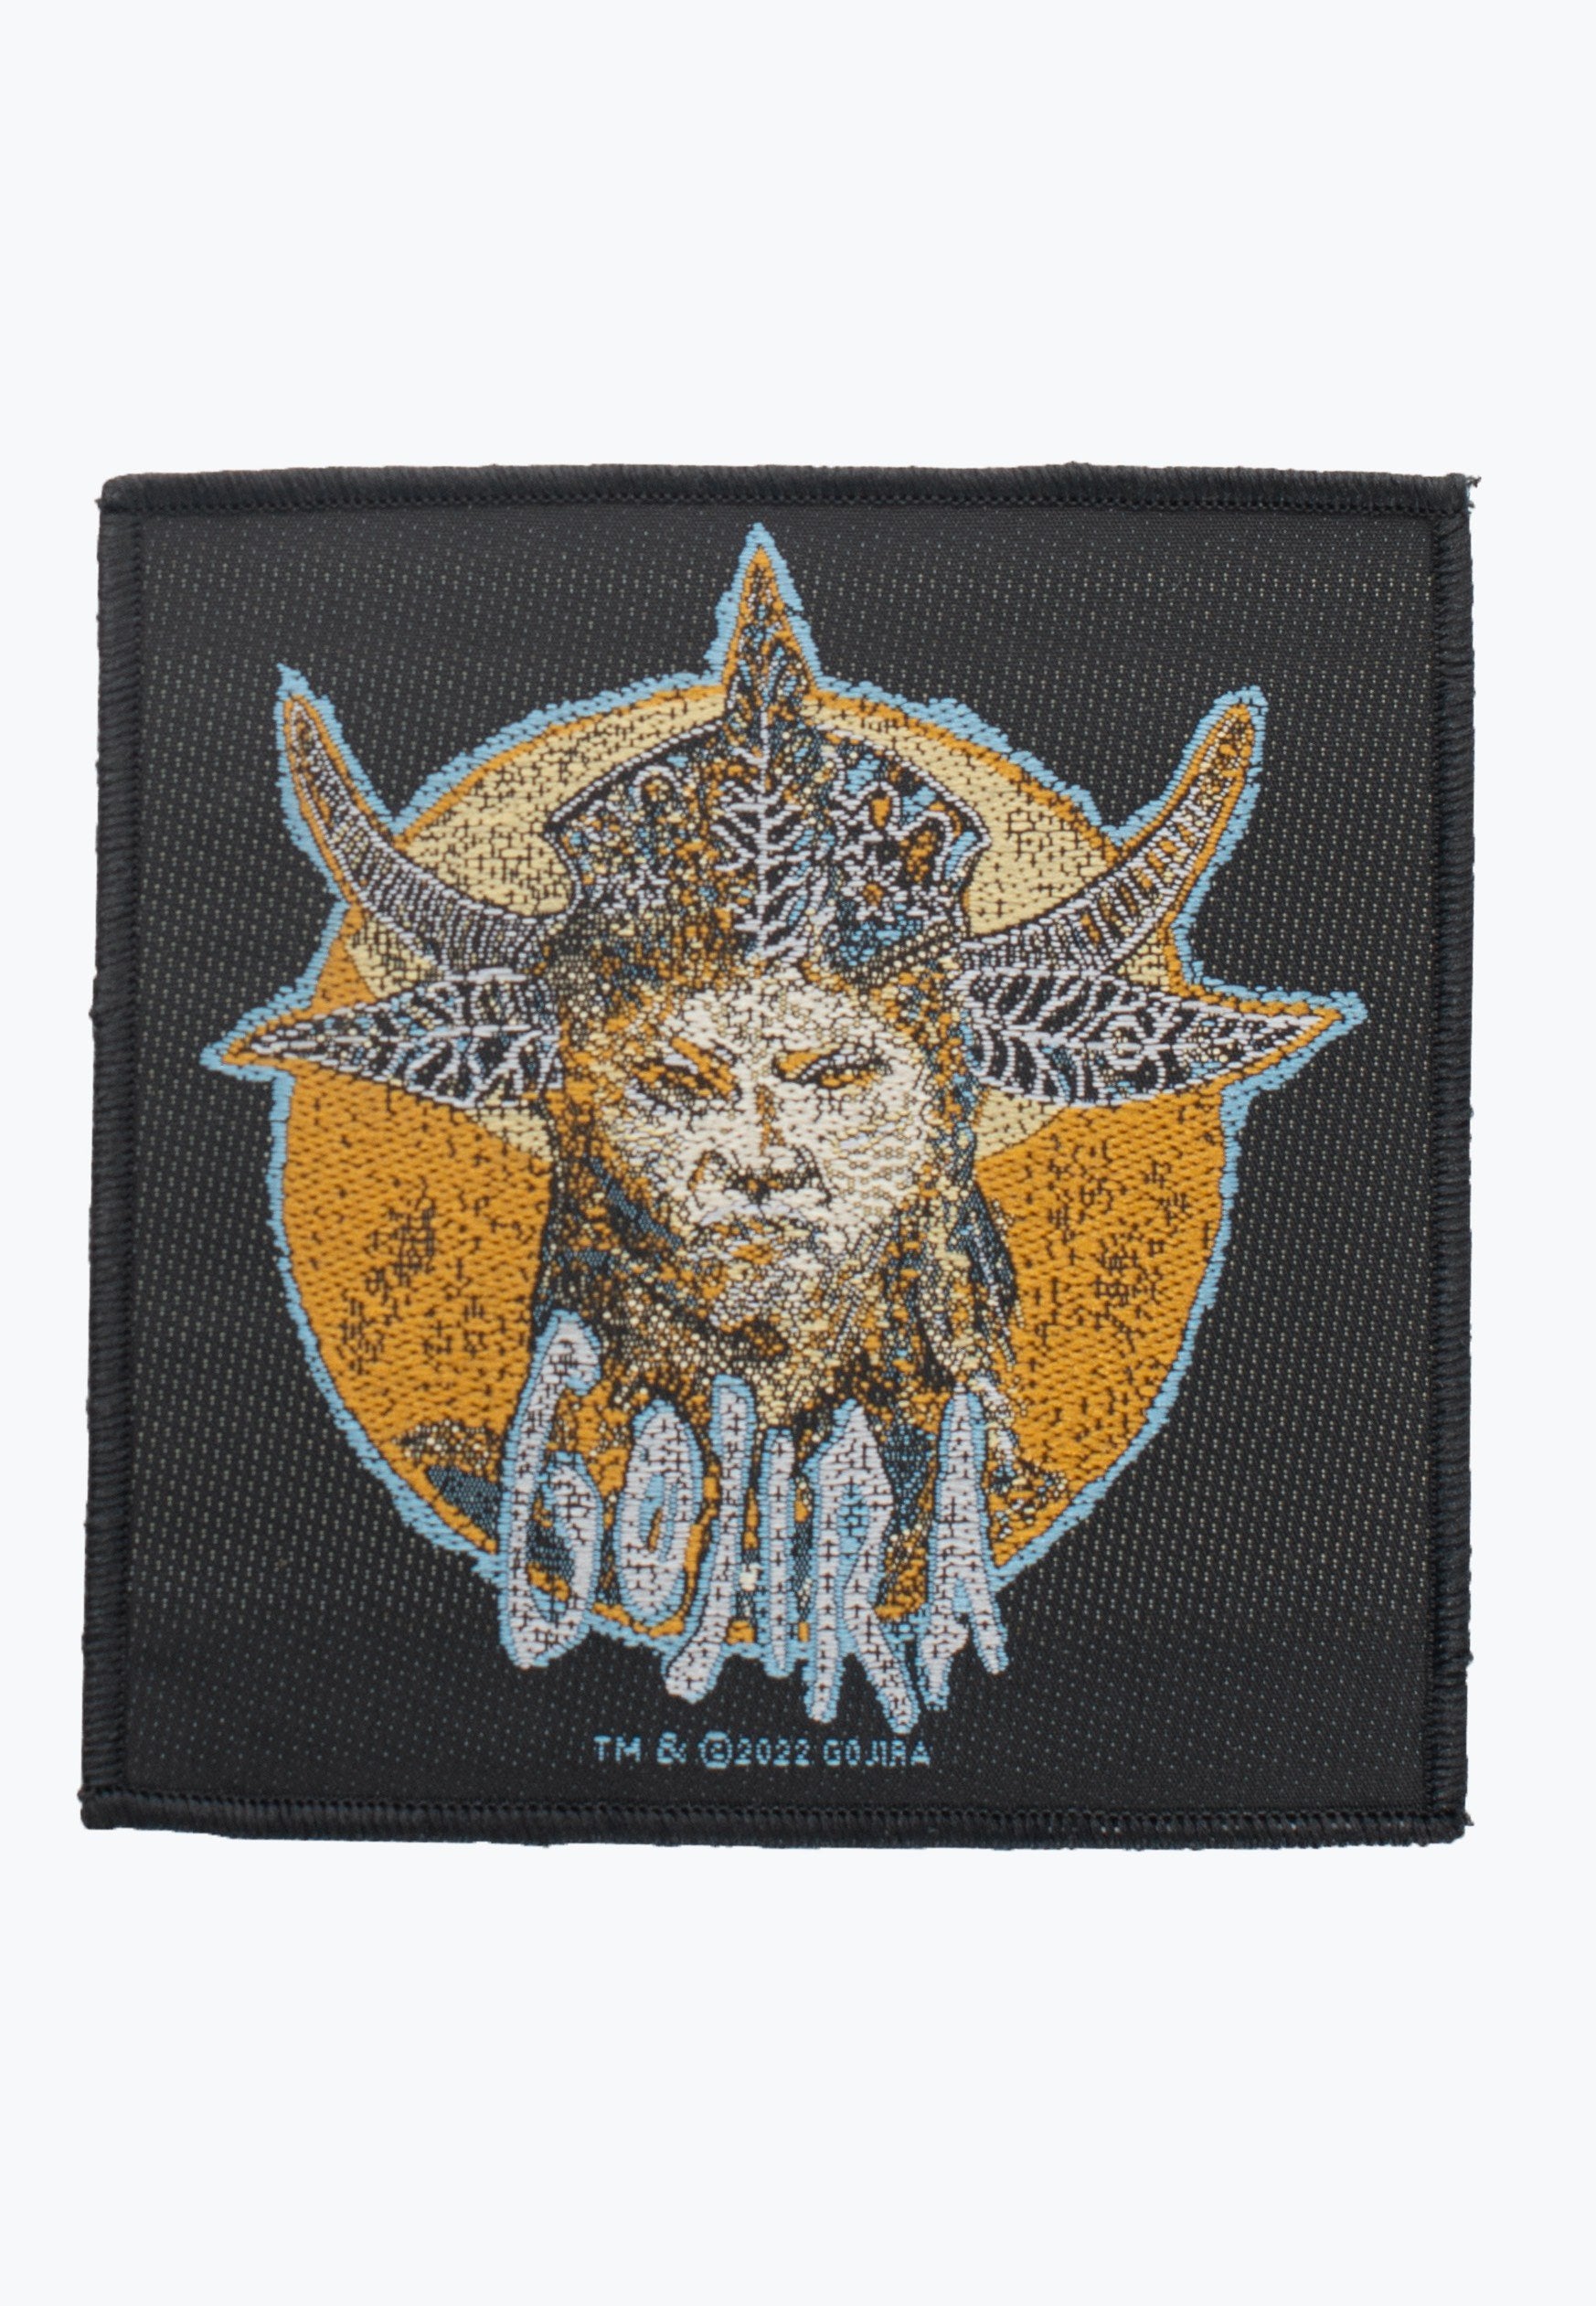 Gojira - Fortitude - Patch